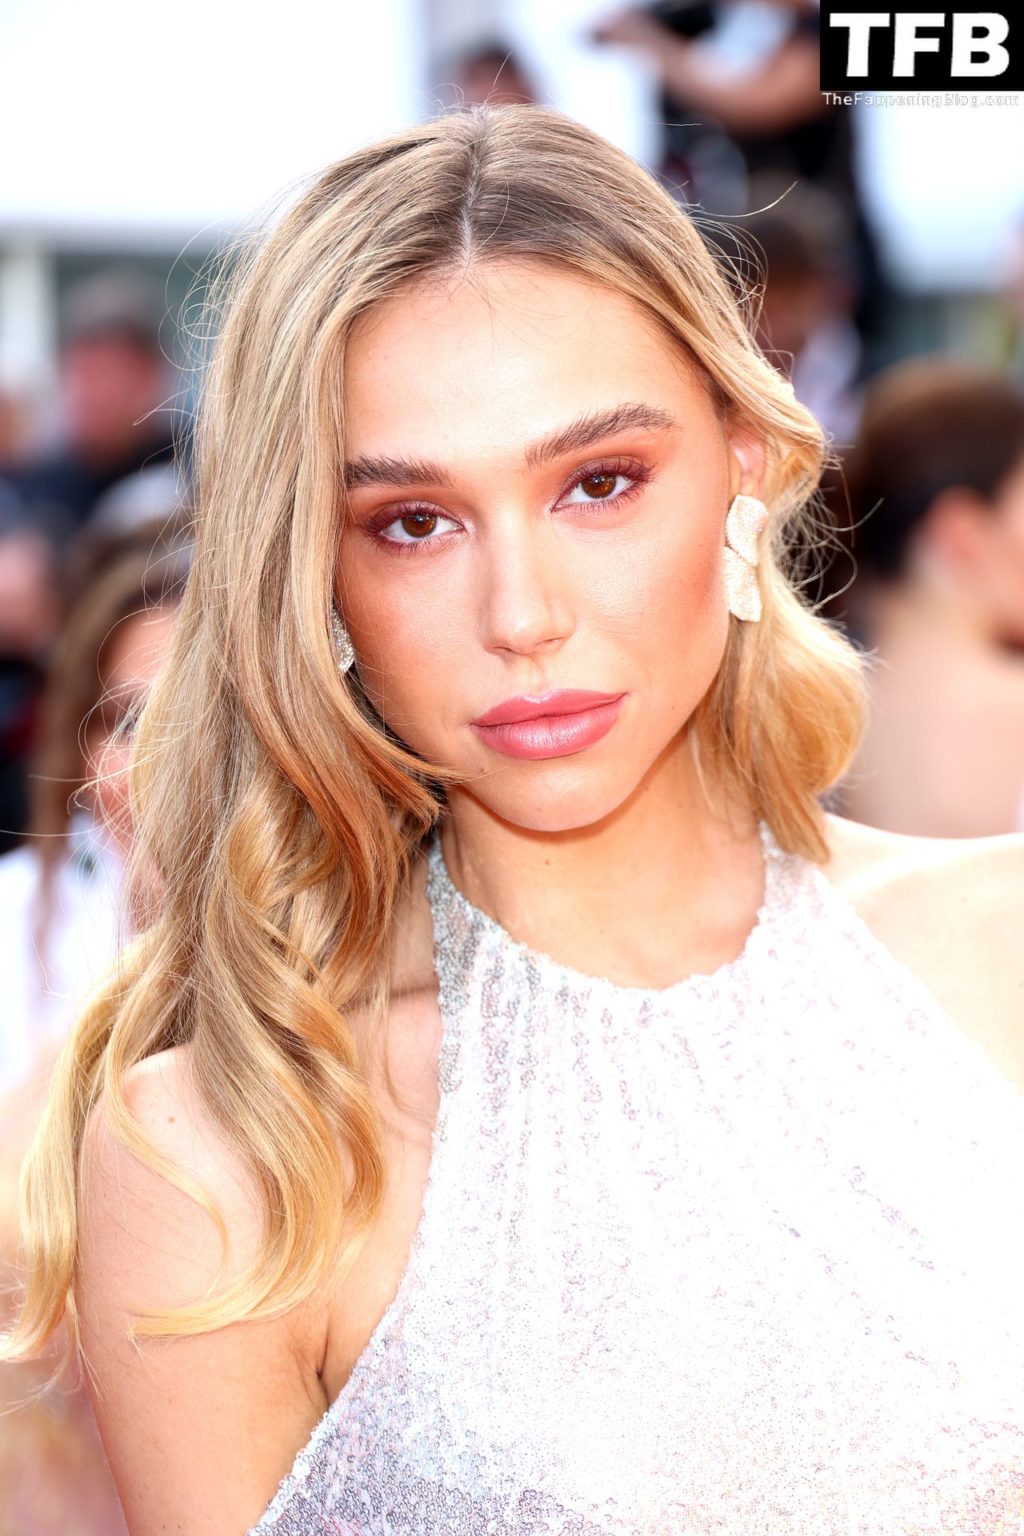 Alexis Ren Looks Beautiful at the Screening of “Mother And Son” in Cannes (8 Photos)